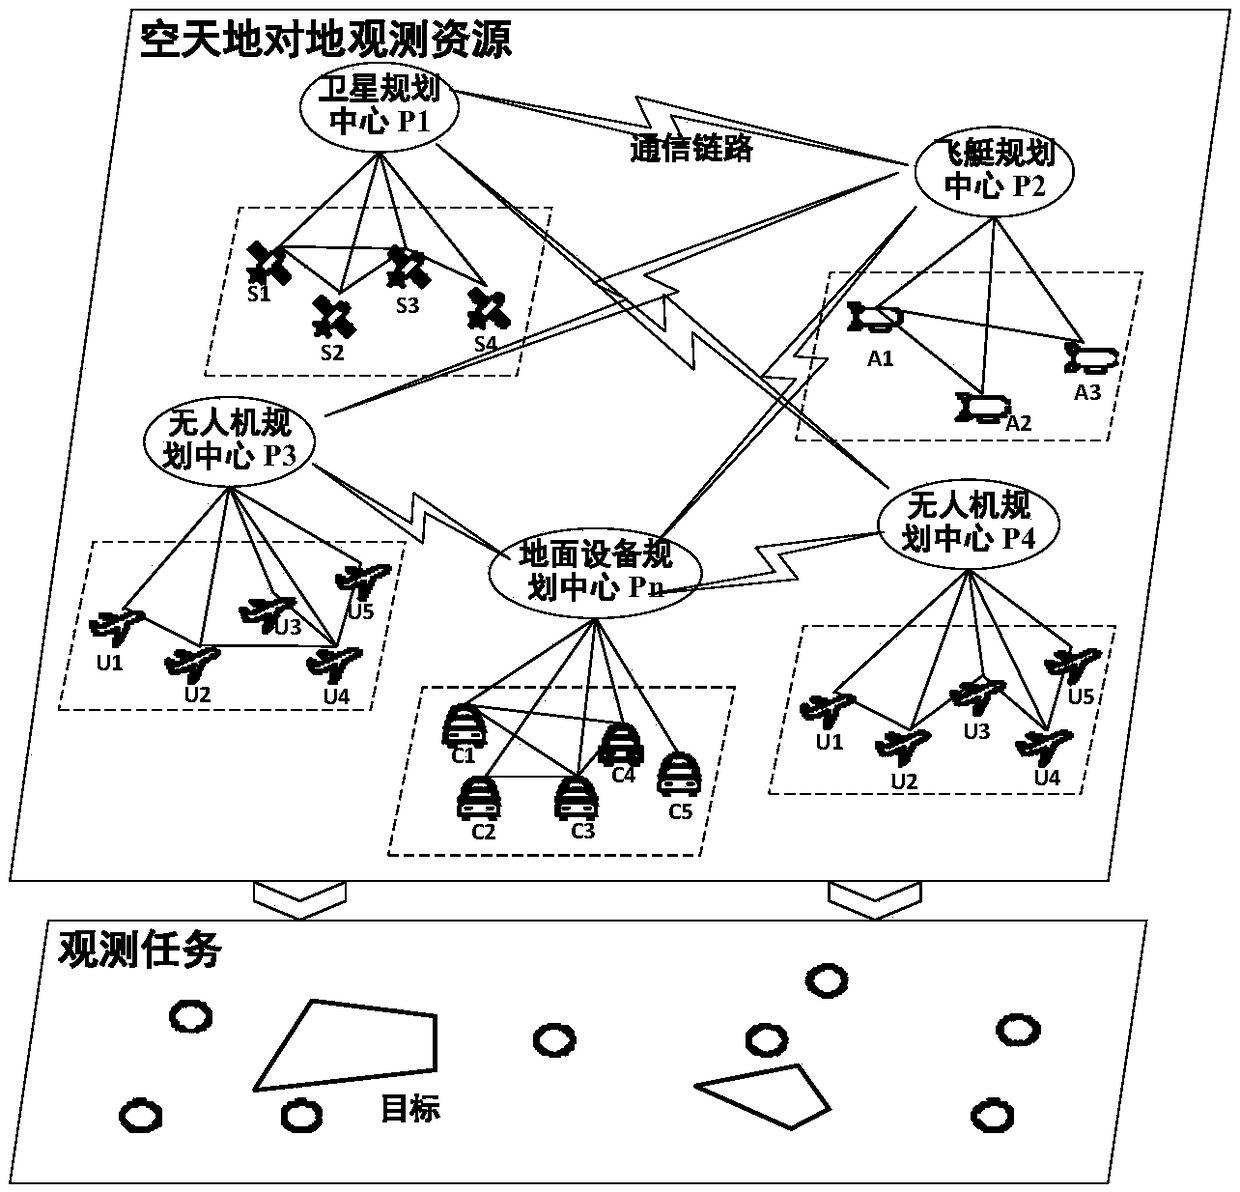 A contract network mechanism-based dynamic planning method for earth observation resources